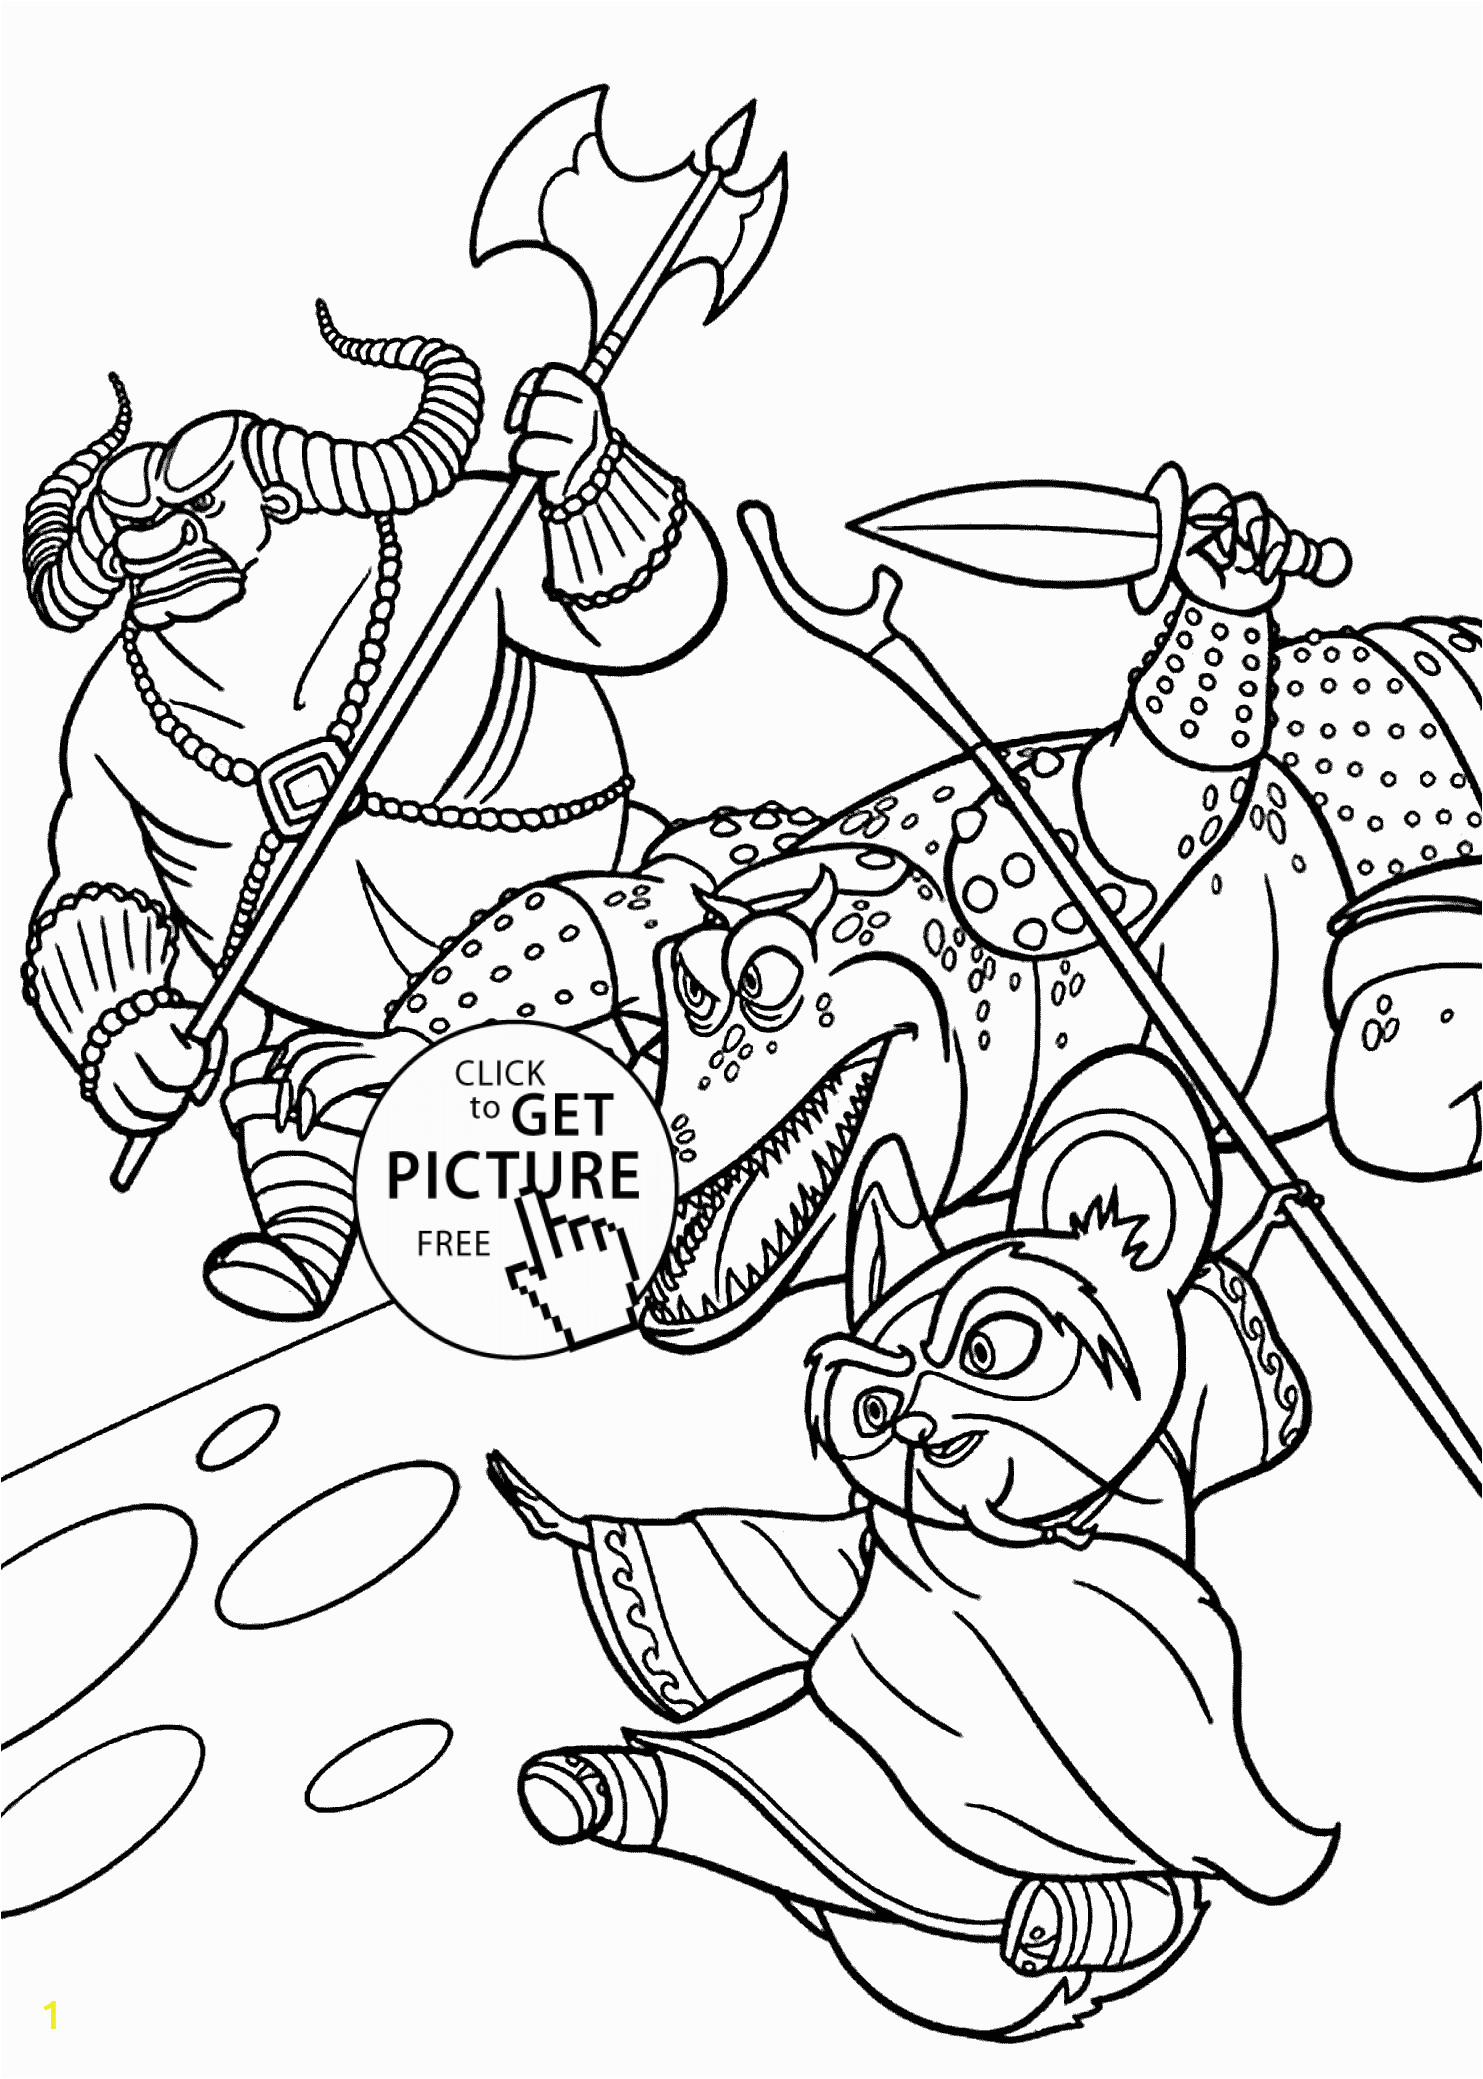 master shifu from kung fu panda coloring pages for kids printable free